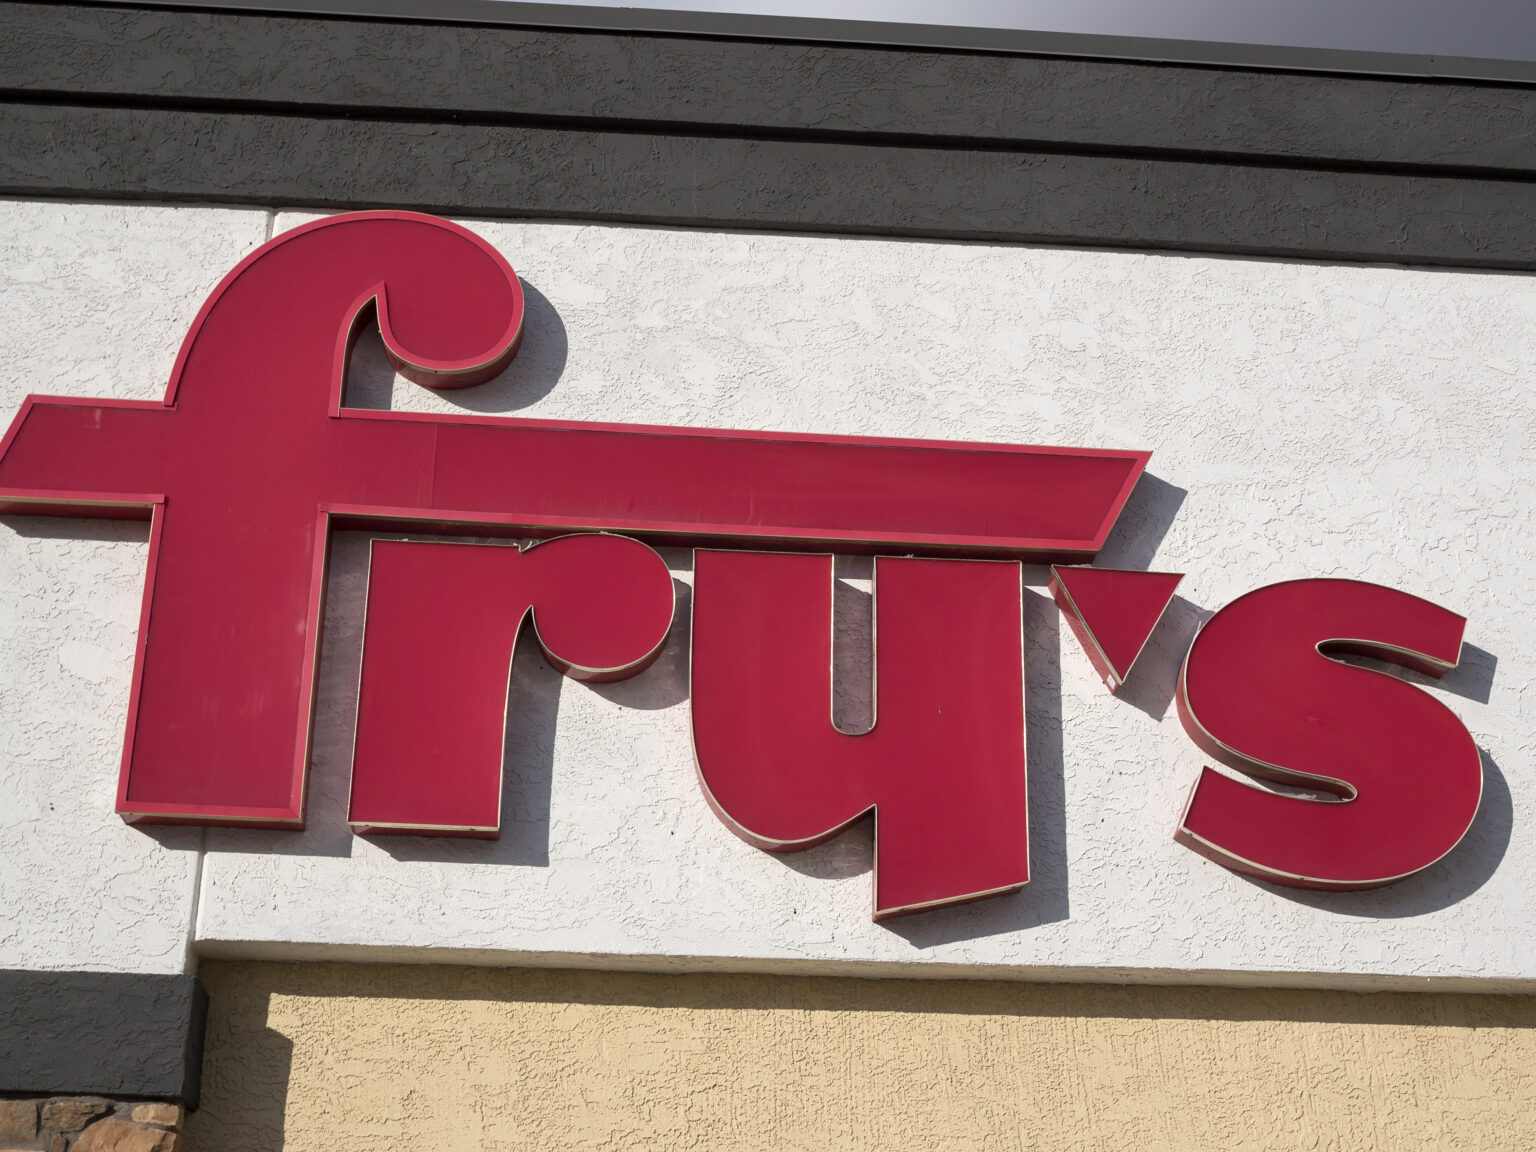 Fry's logo sign on the exterior of a store